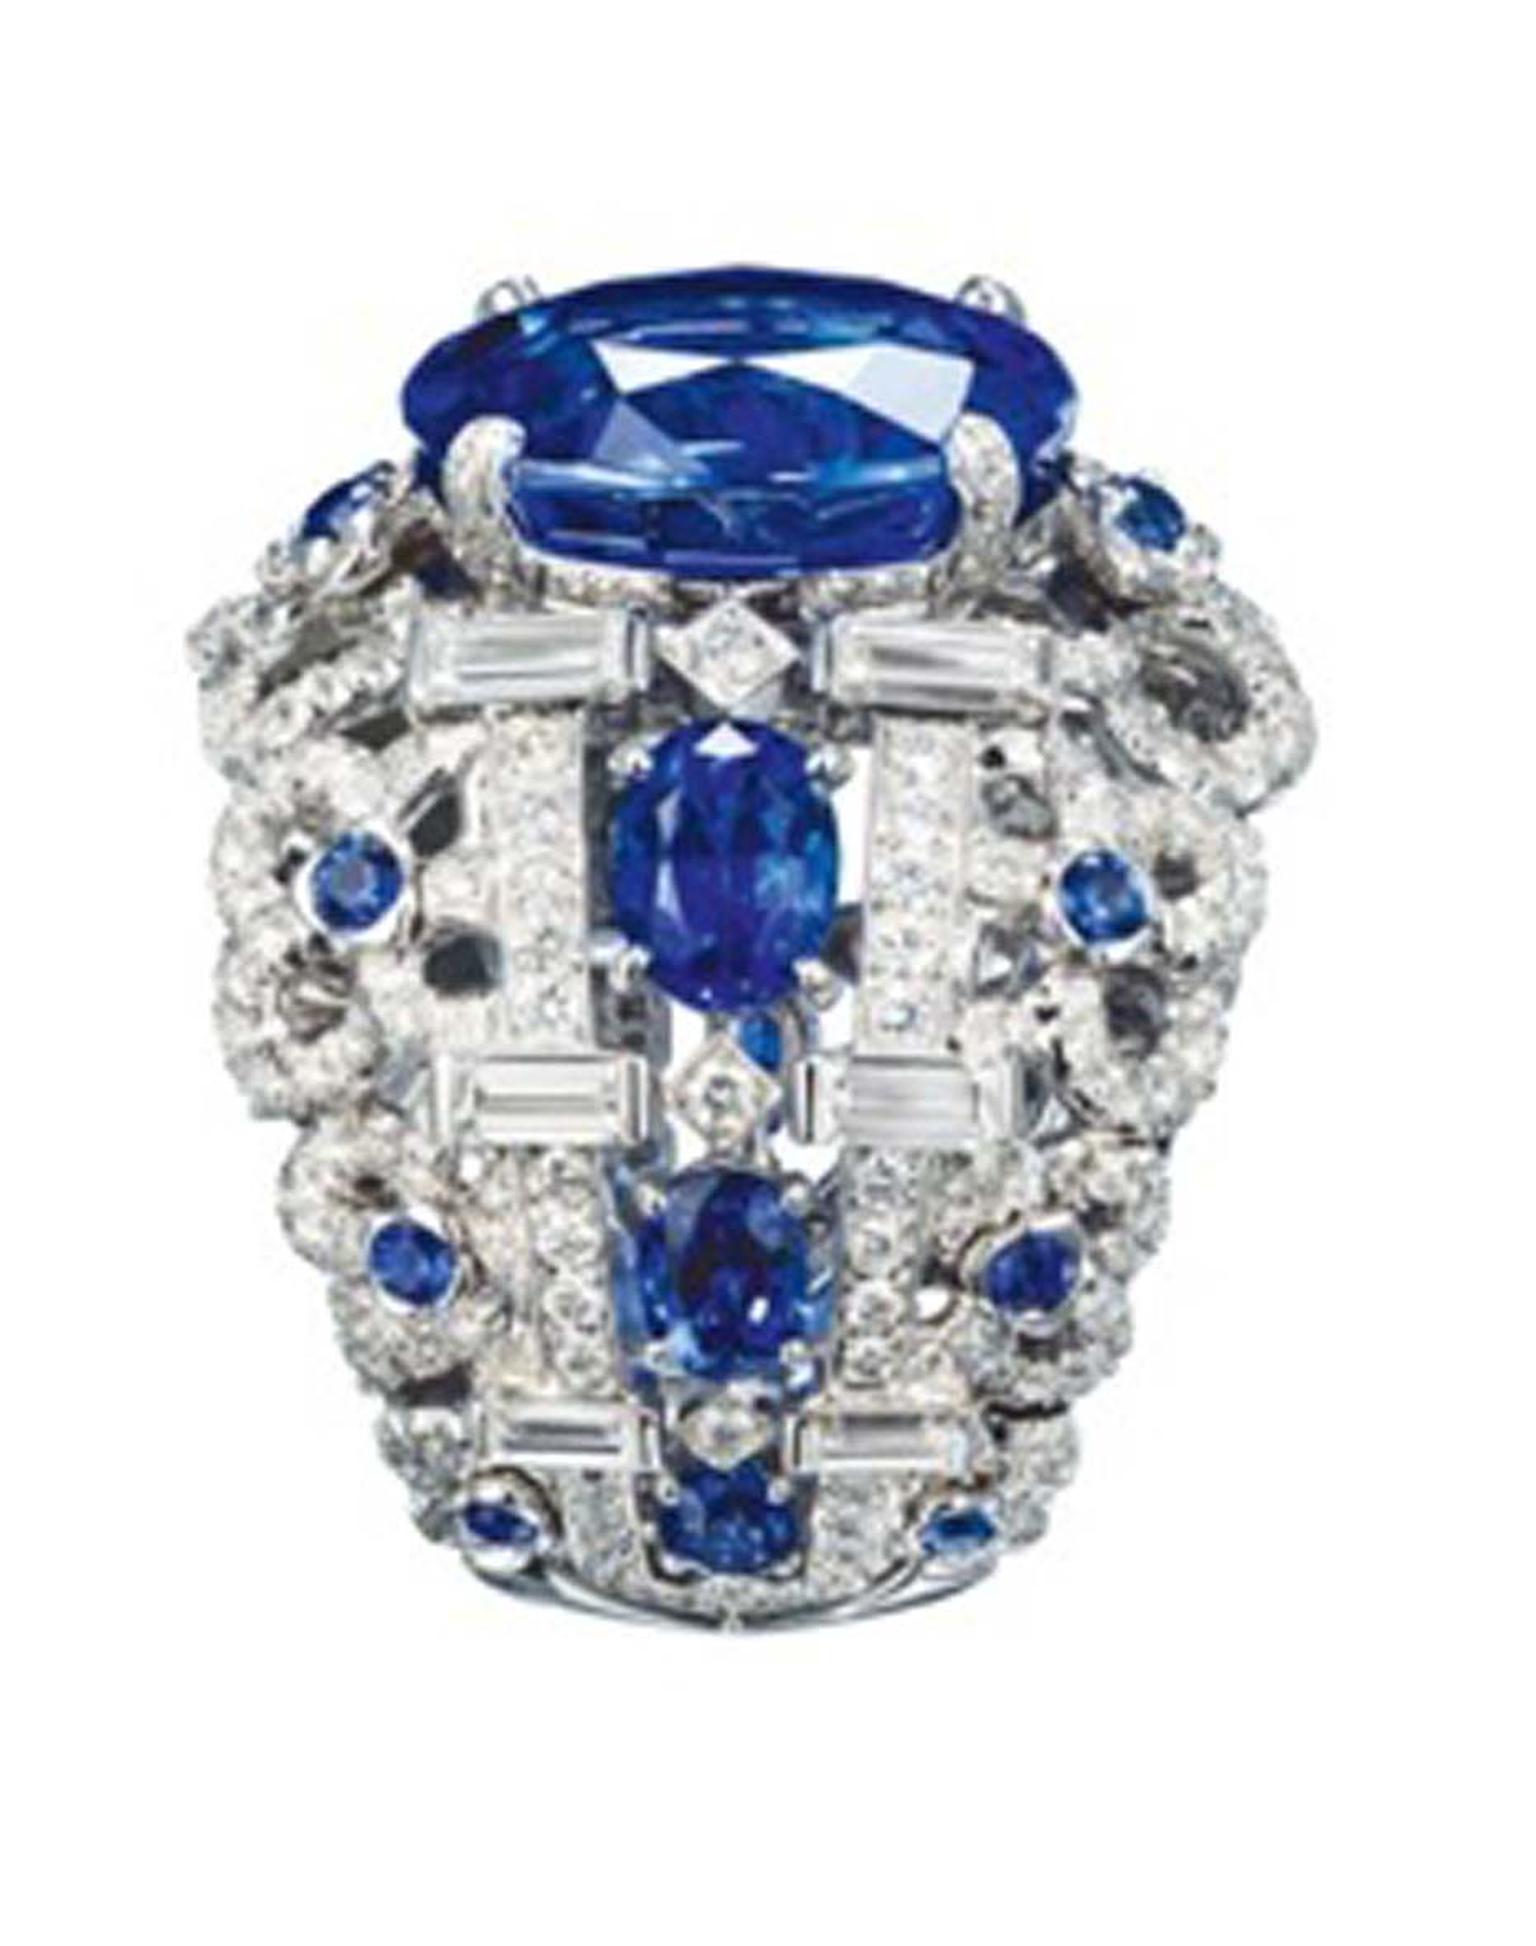 Chaumet Hortensia white gold ring with diamonds, sapphires and a centre oval-cut sapphire.